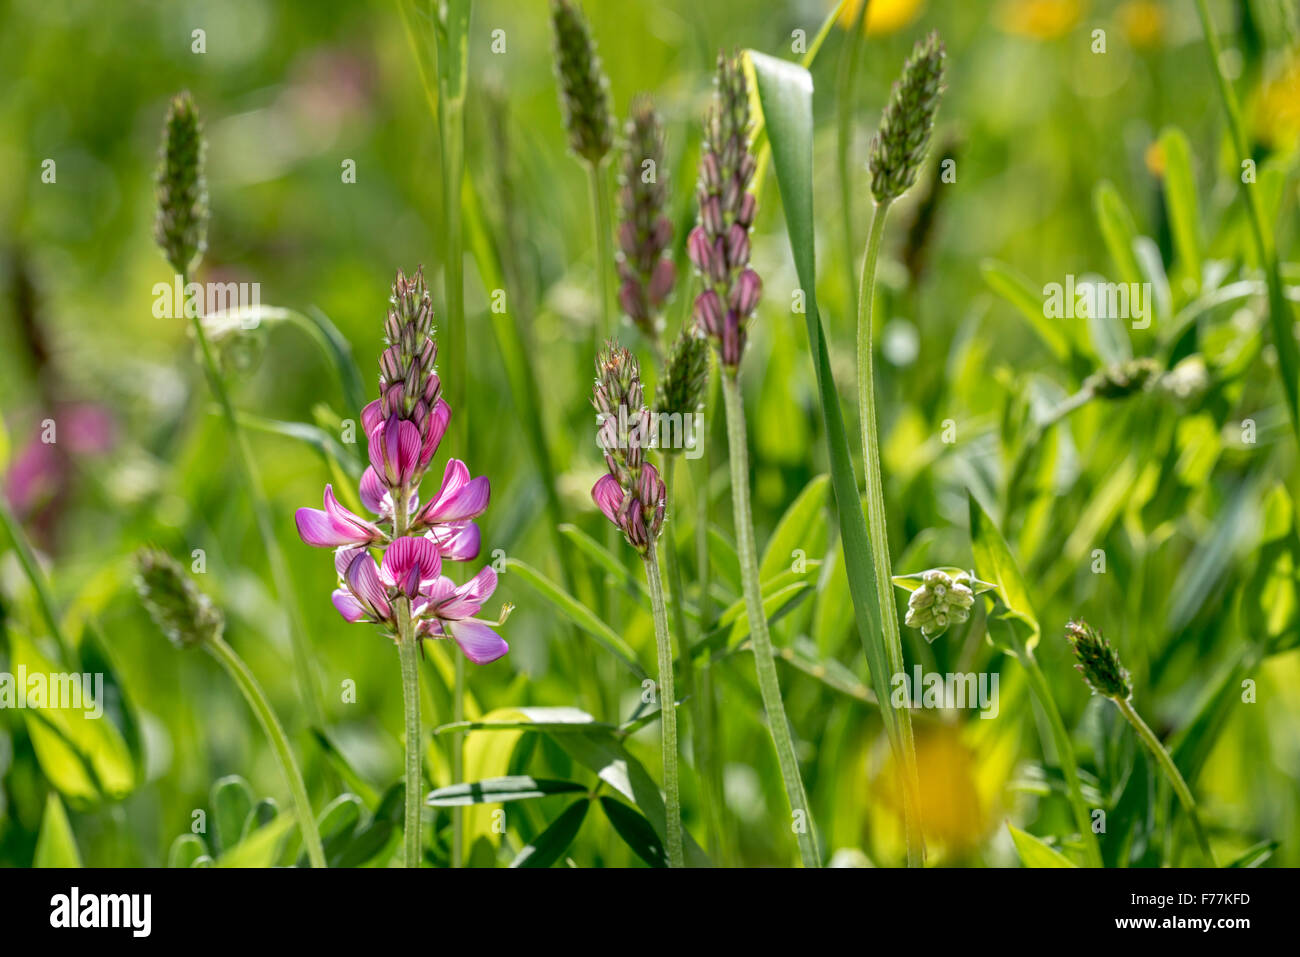 Common sainfoin (Onobrychis viciifolia / Onobrychis sativa) among other wildflowers and grasses in meadow Stock Photo